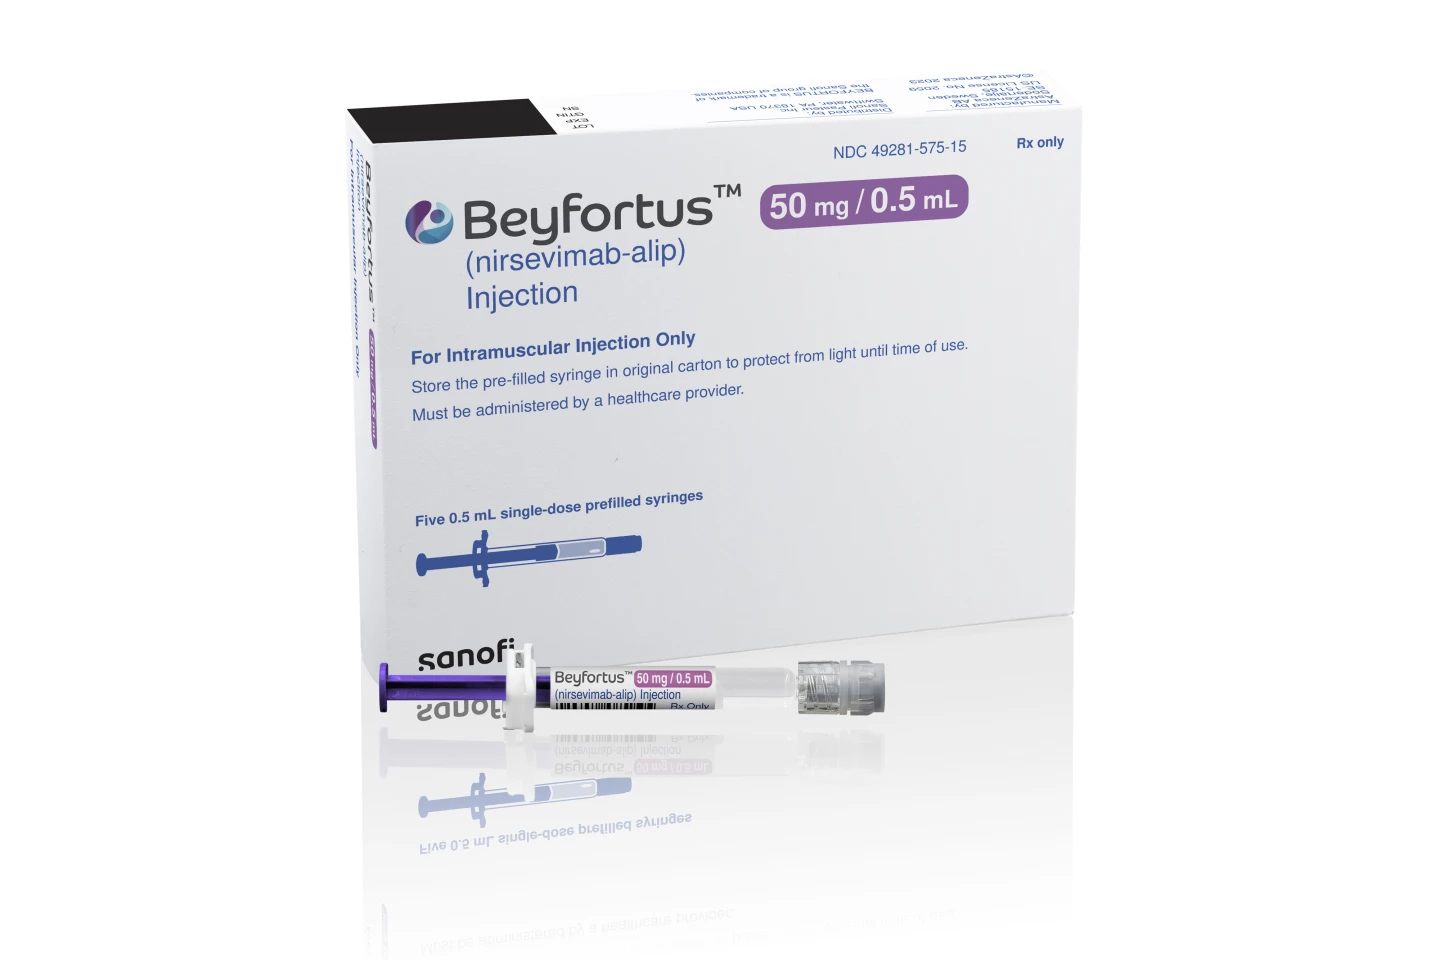 Food and Drug Administration Approves New Drug, Beyfortus, to Protect Babies and Toddlers Up to 2 Years Old From Respiratory Virus (RSV) 